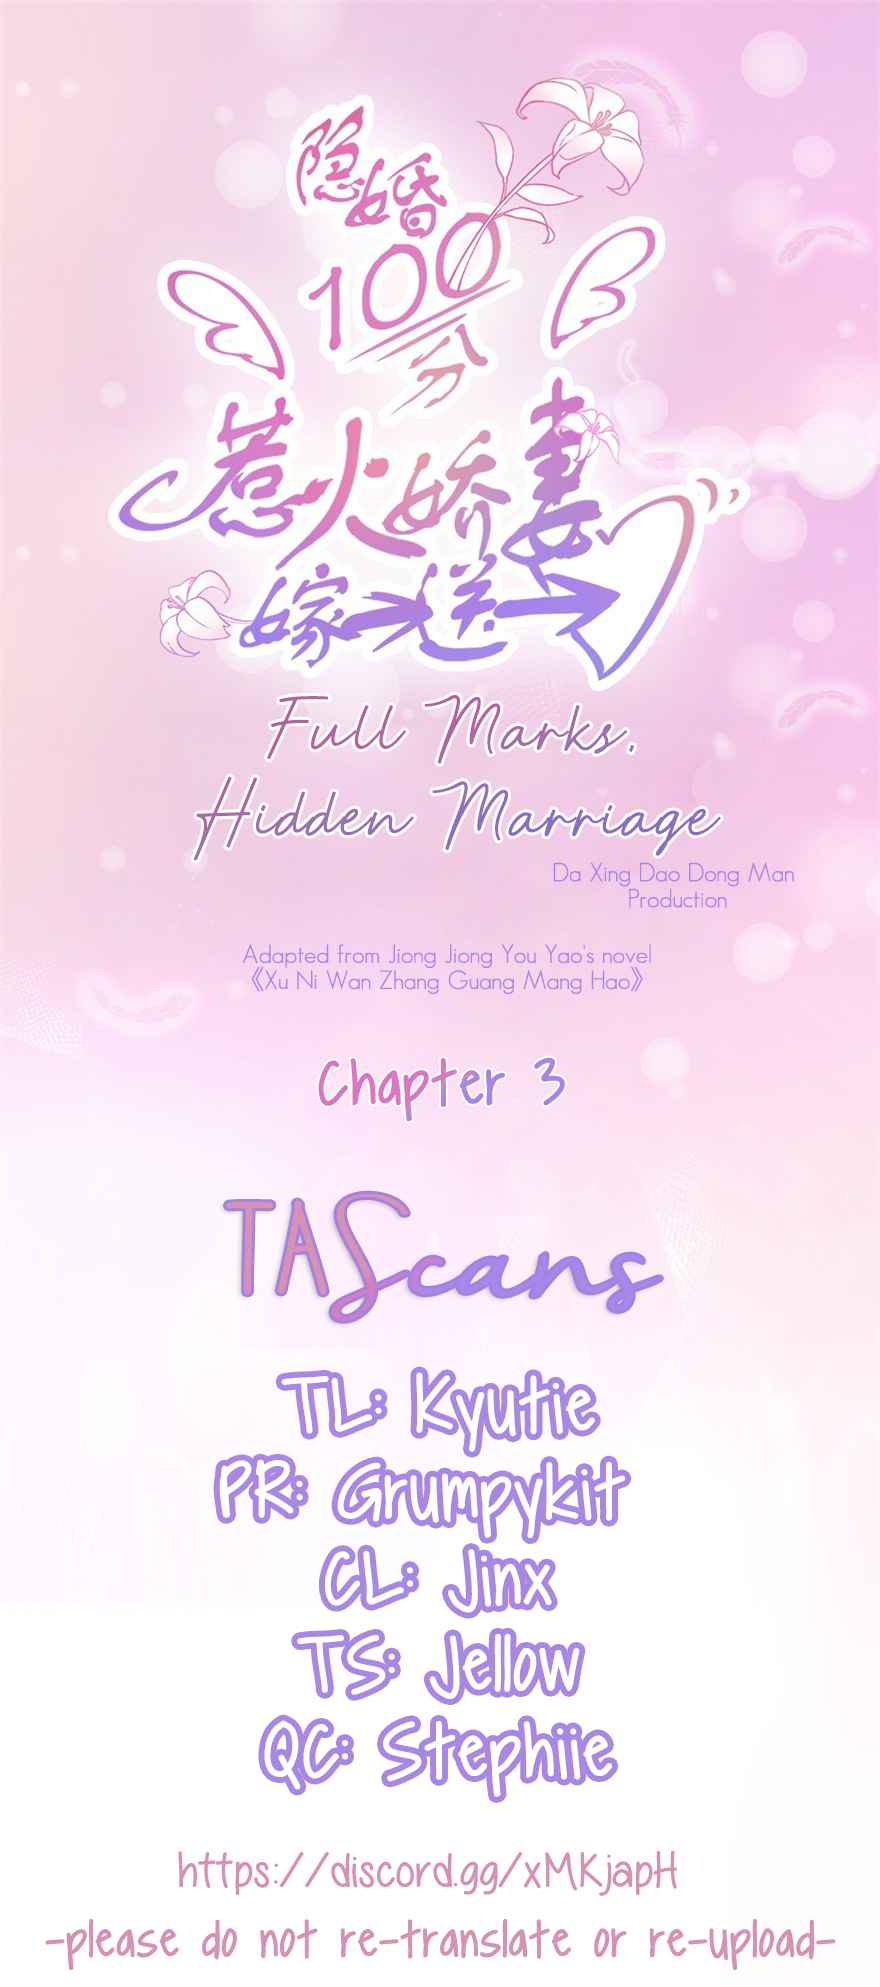 Full Marks, Hidden Marriage (大行道动漫) Ch. 3 Reality of an Overbearing President